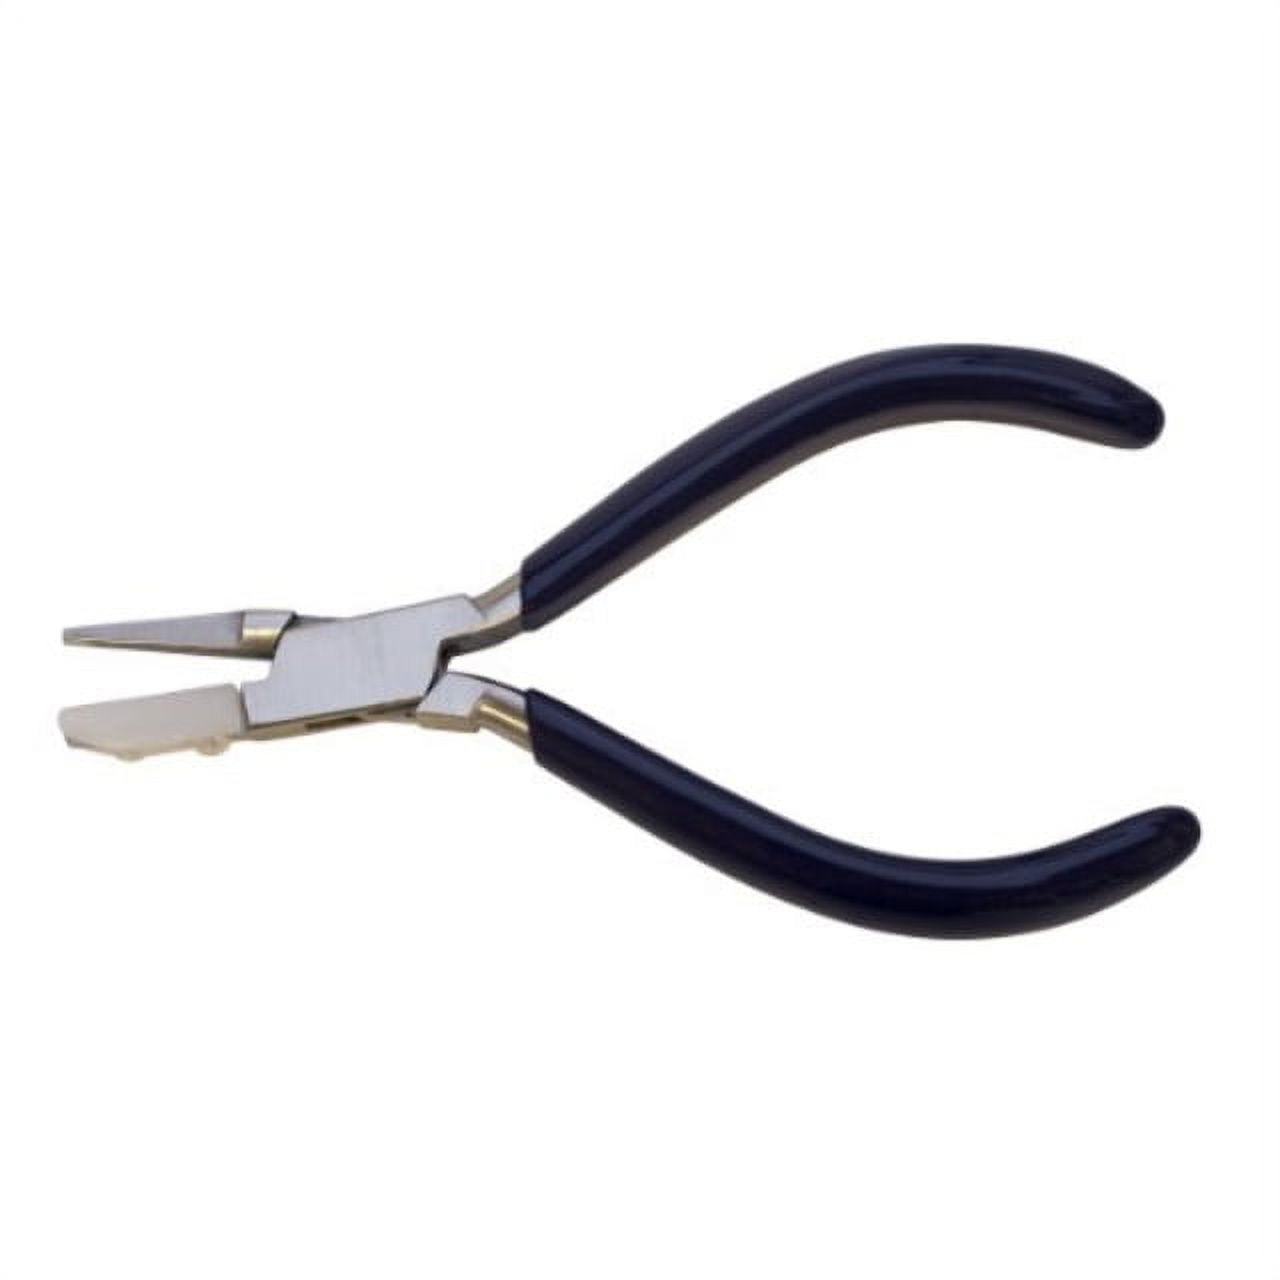 CASOMAN Magnetic Plier Holder,Holds up to 10 Pieces Pliers